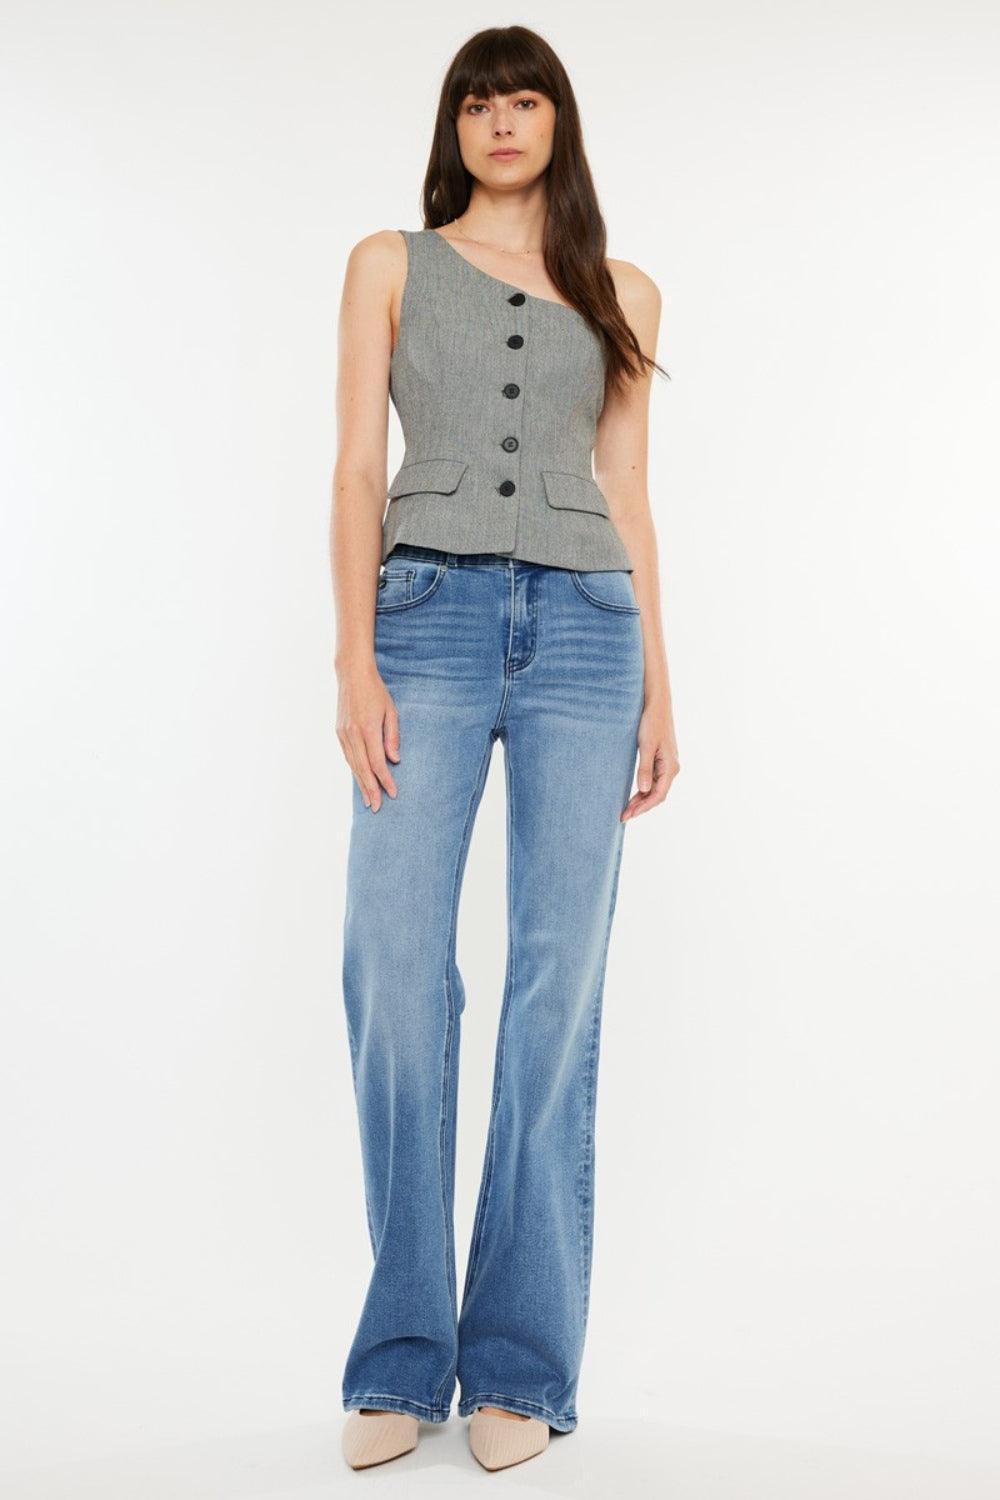 Kancan Ultra High Rise Cat's Whiskers Jeans - Jessiz Boutique